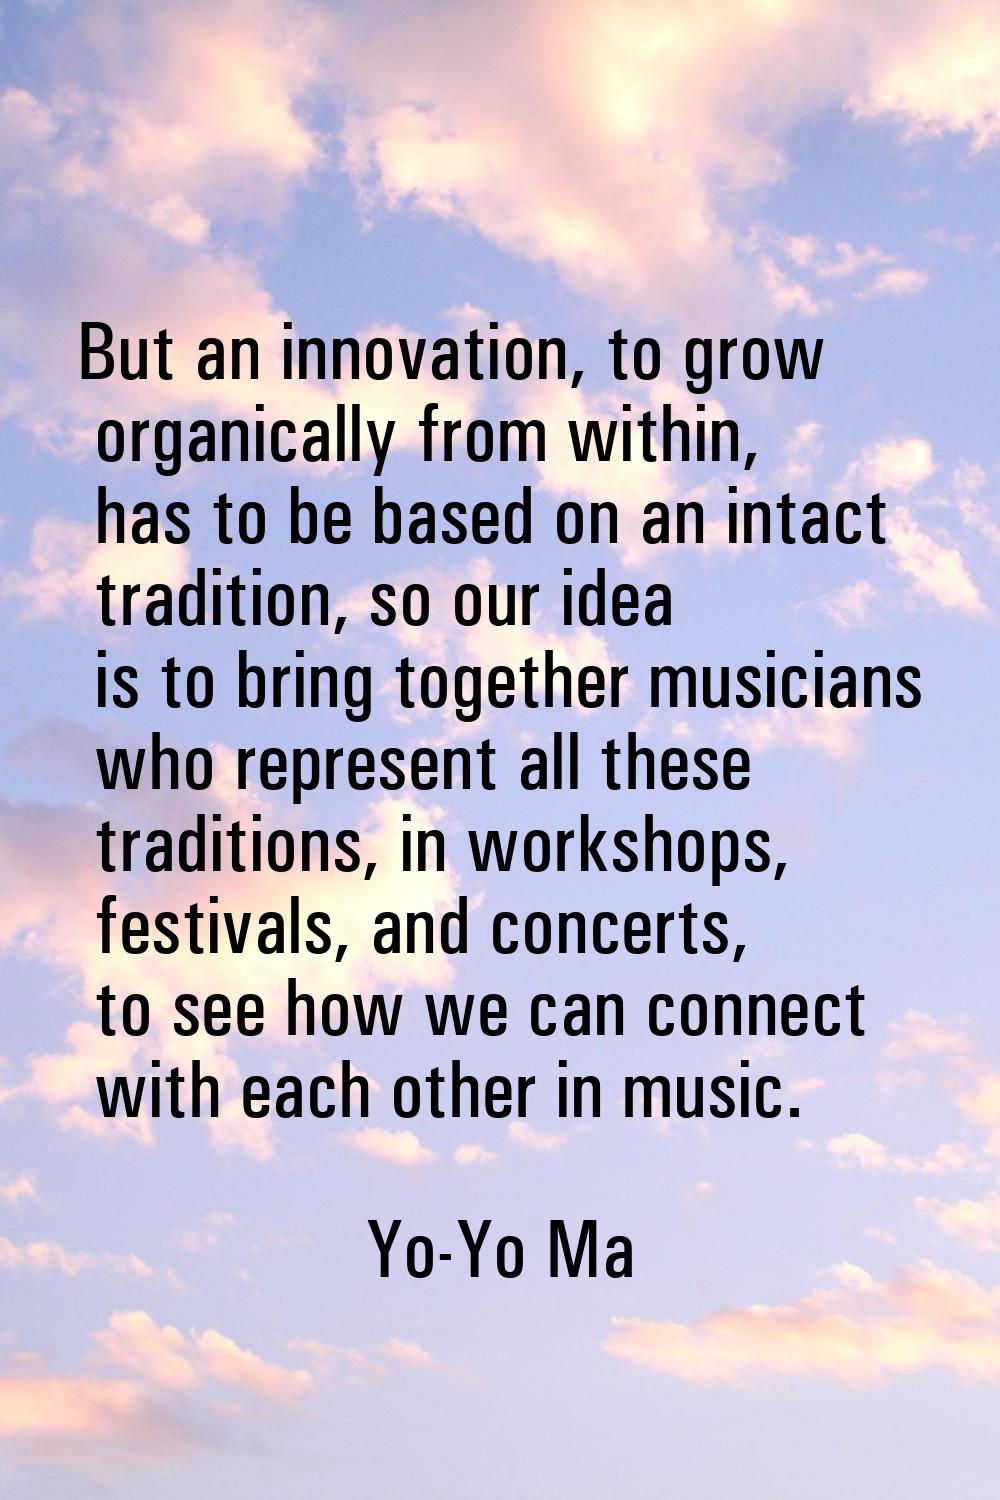 But an innovation, to grow organically from within, has to be based on an intact tradition, so our 